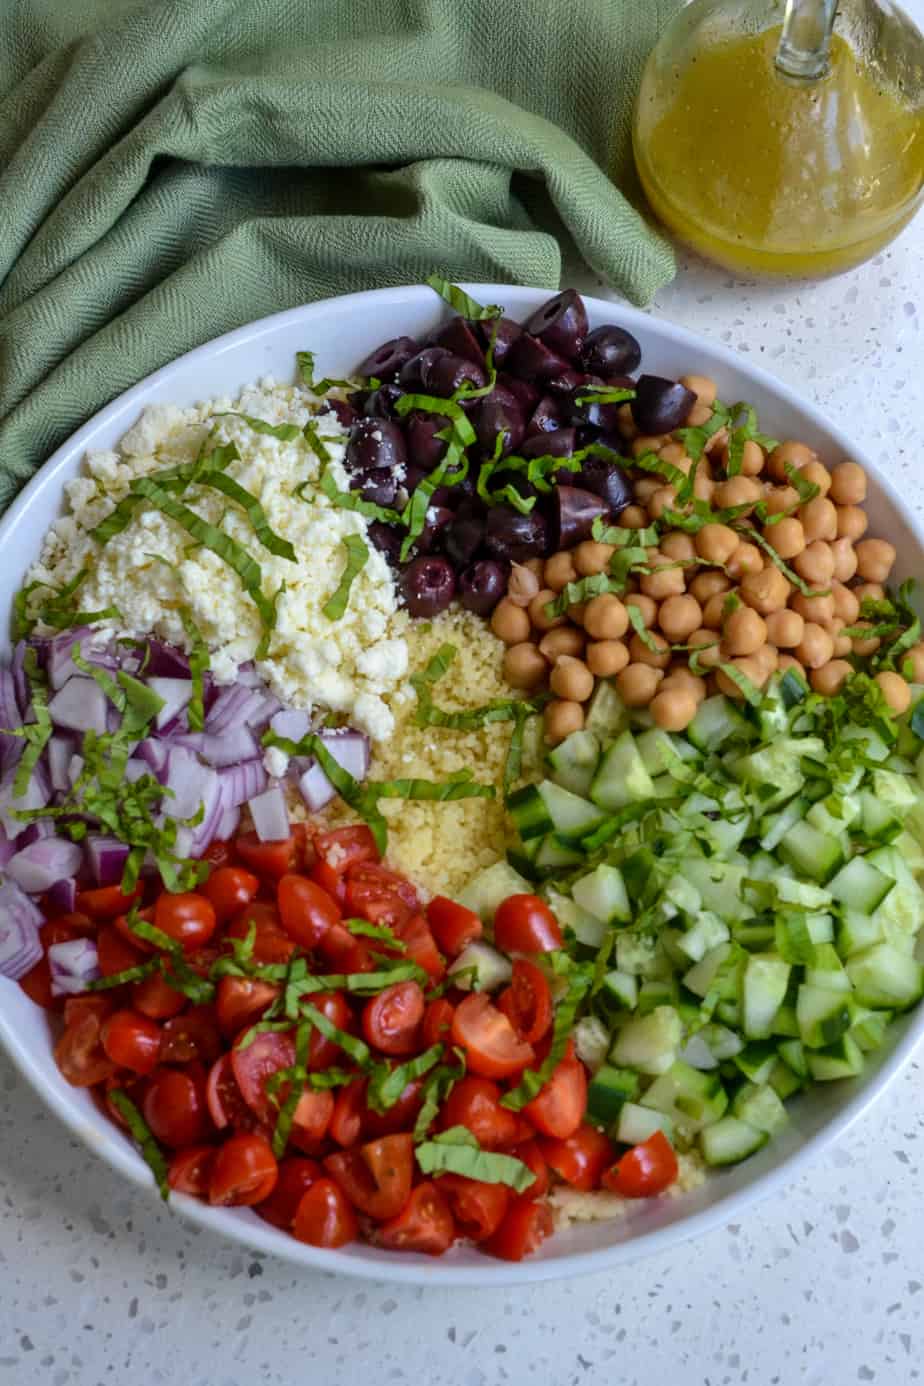 The ingredients for Mediterranean Couscous Salad